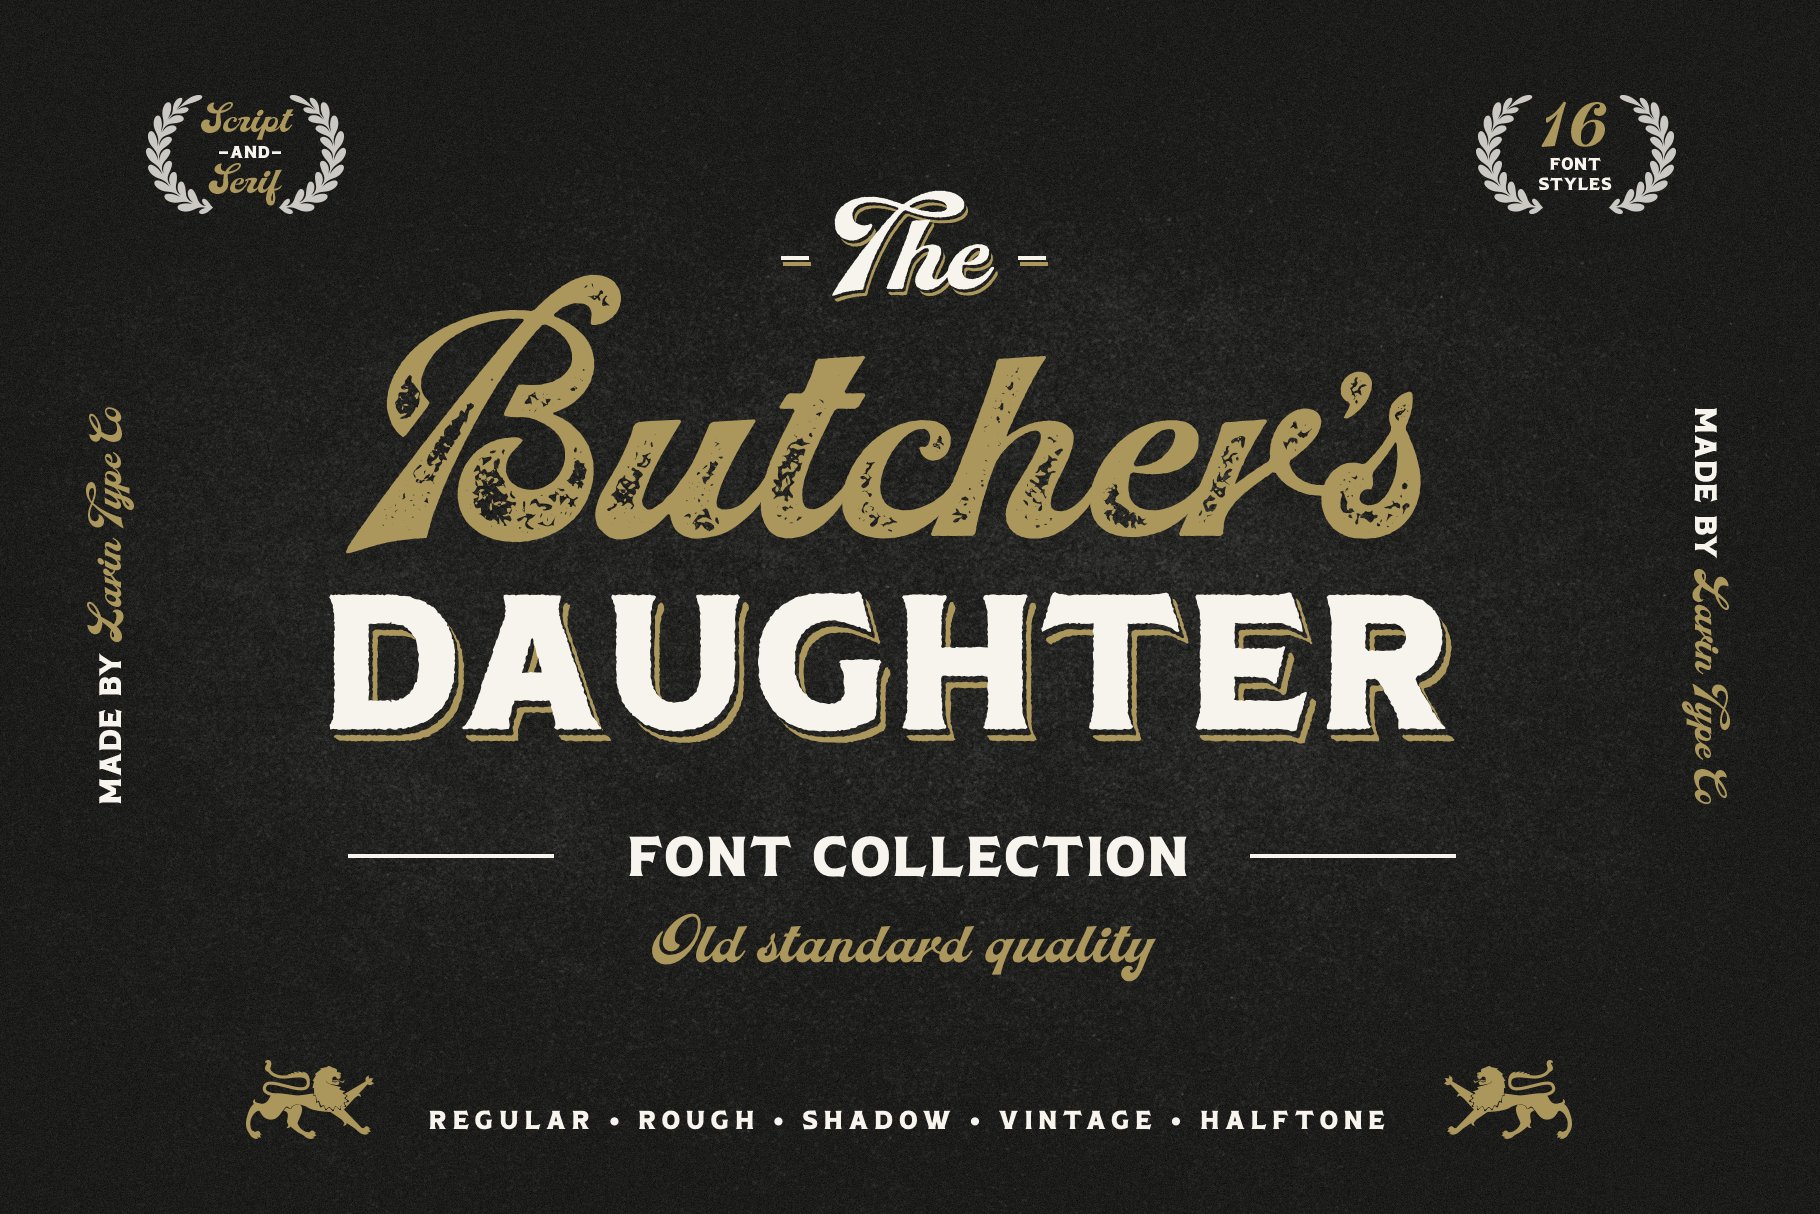 Butcher's Daughter cover image.